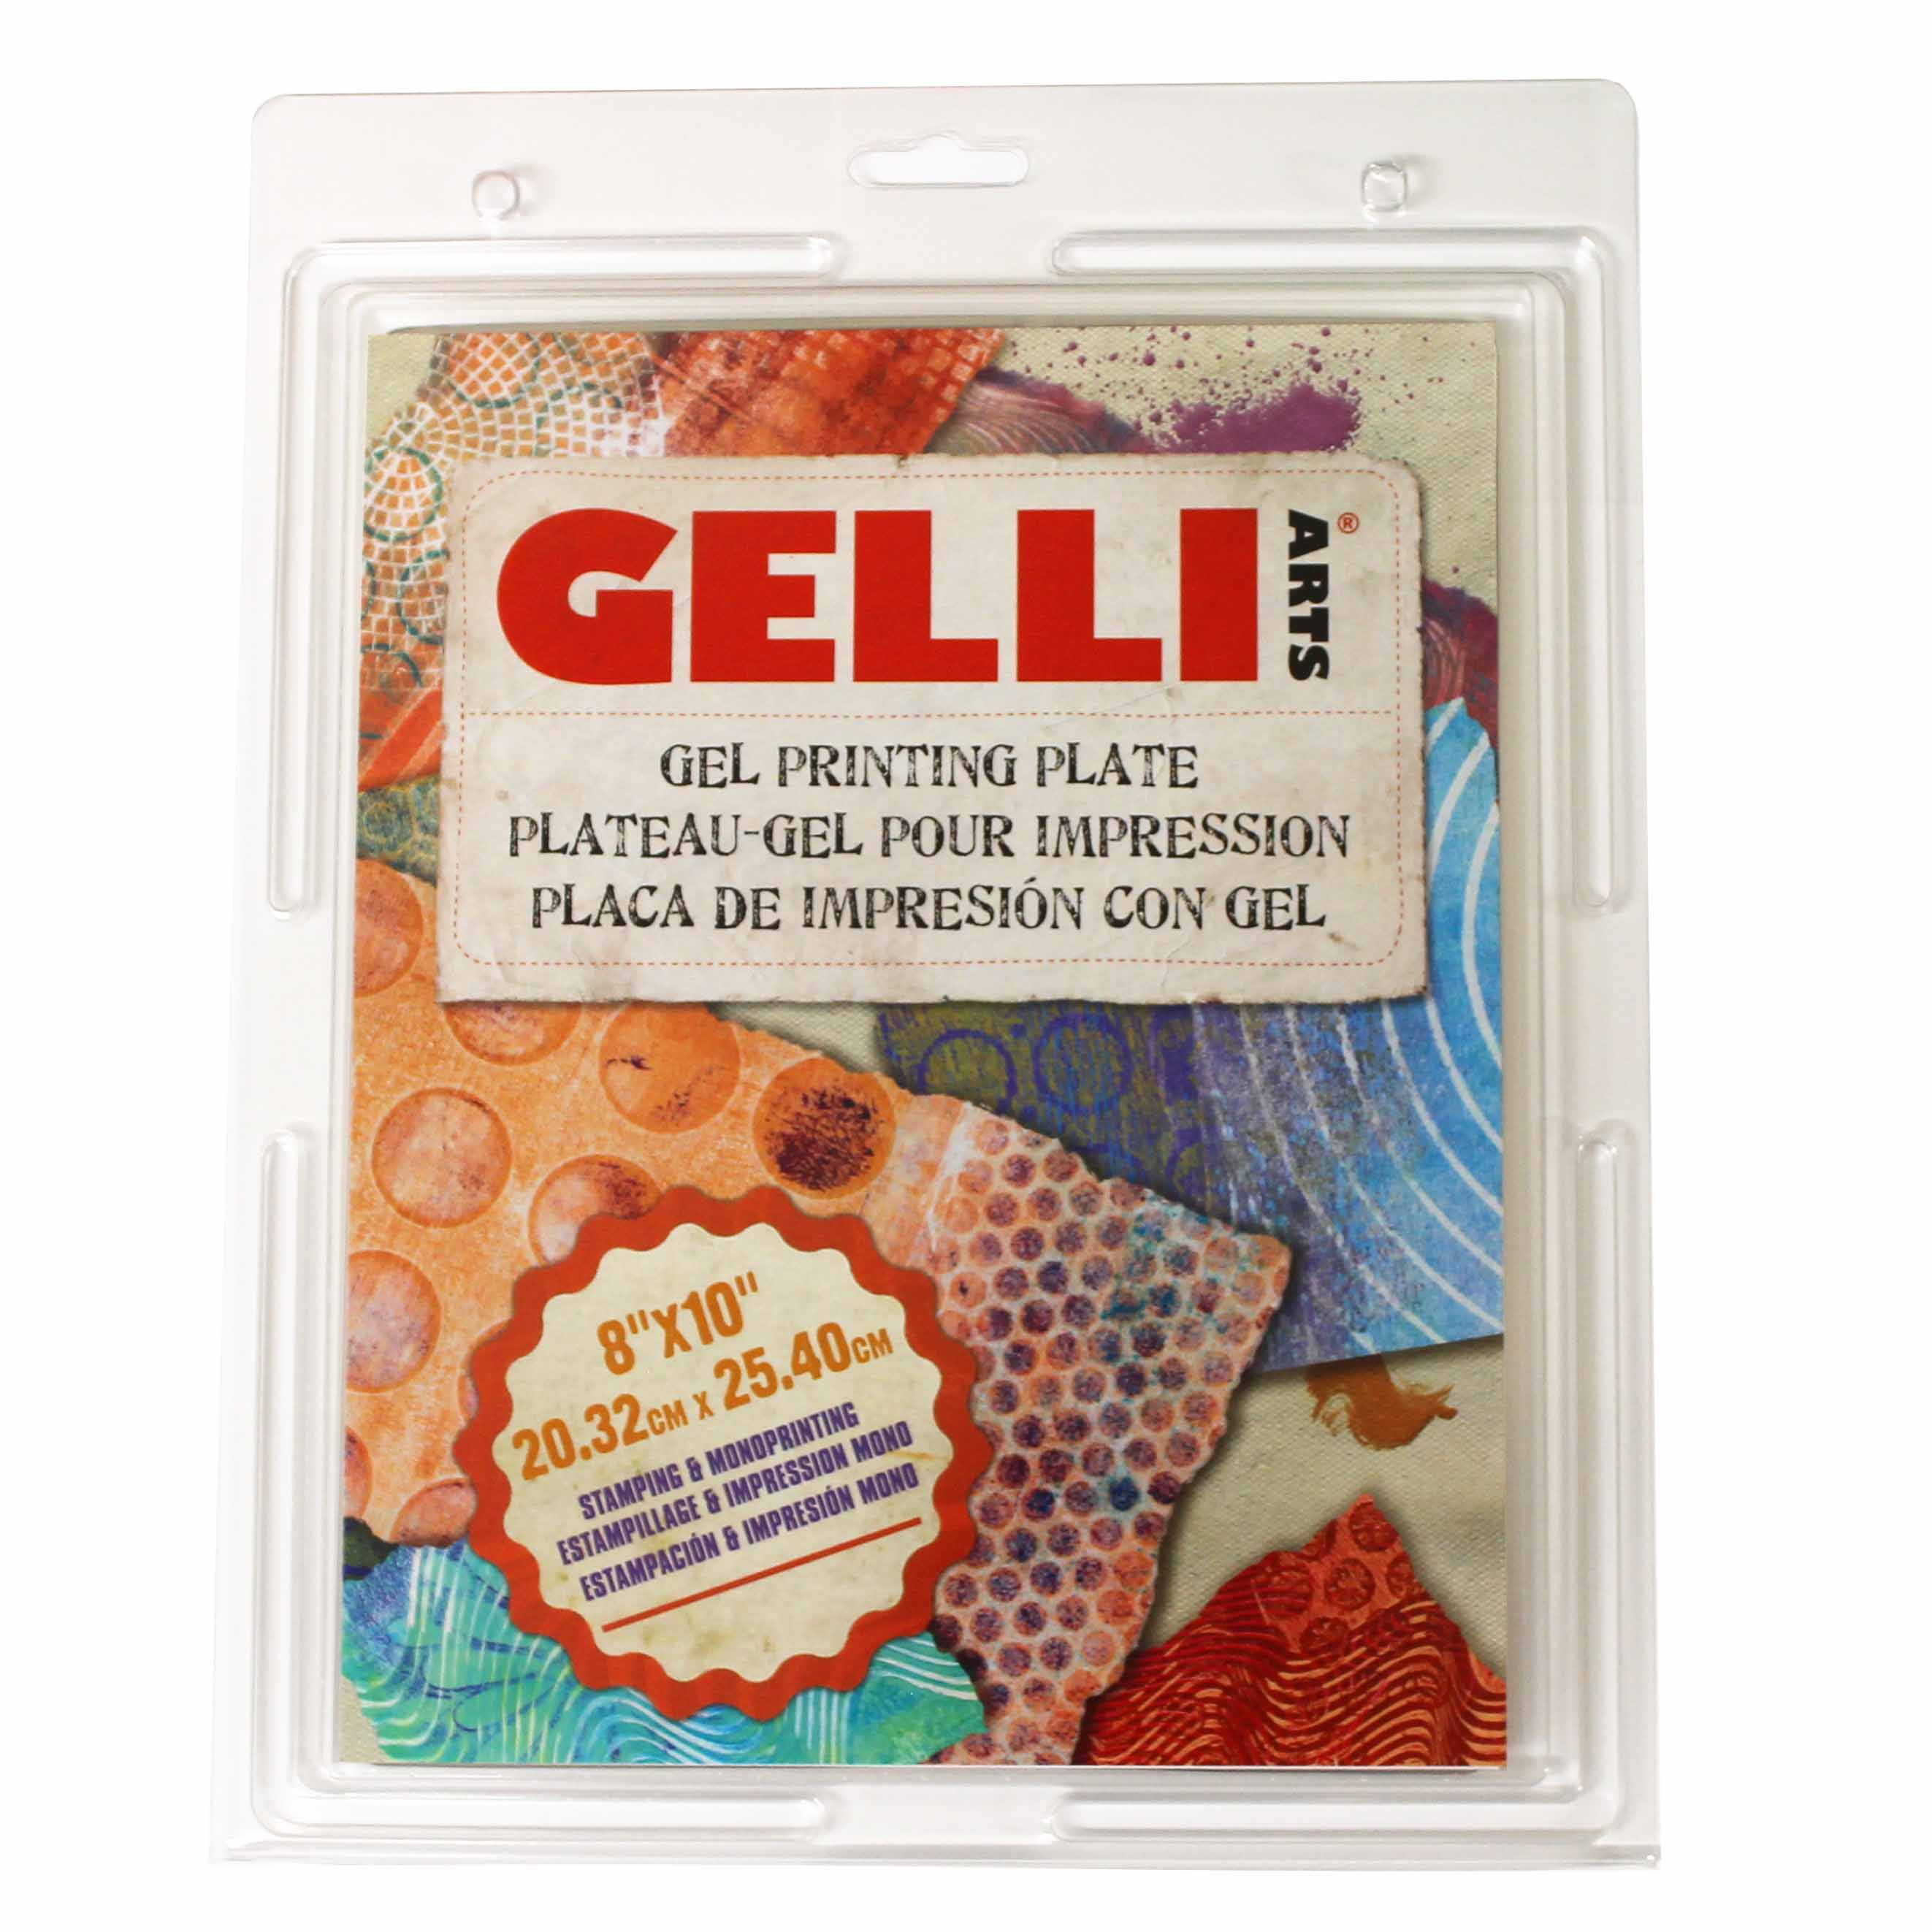 Gelli Plate Printing – From Victory Road